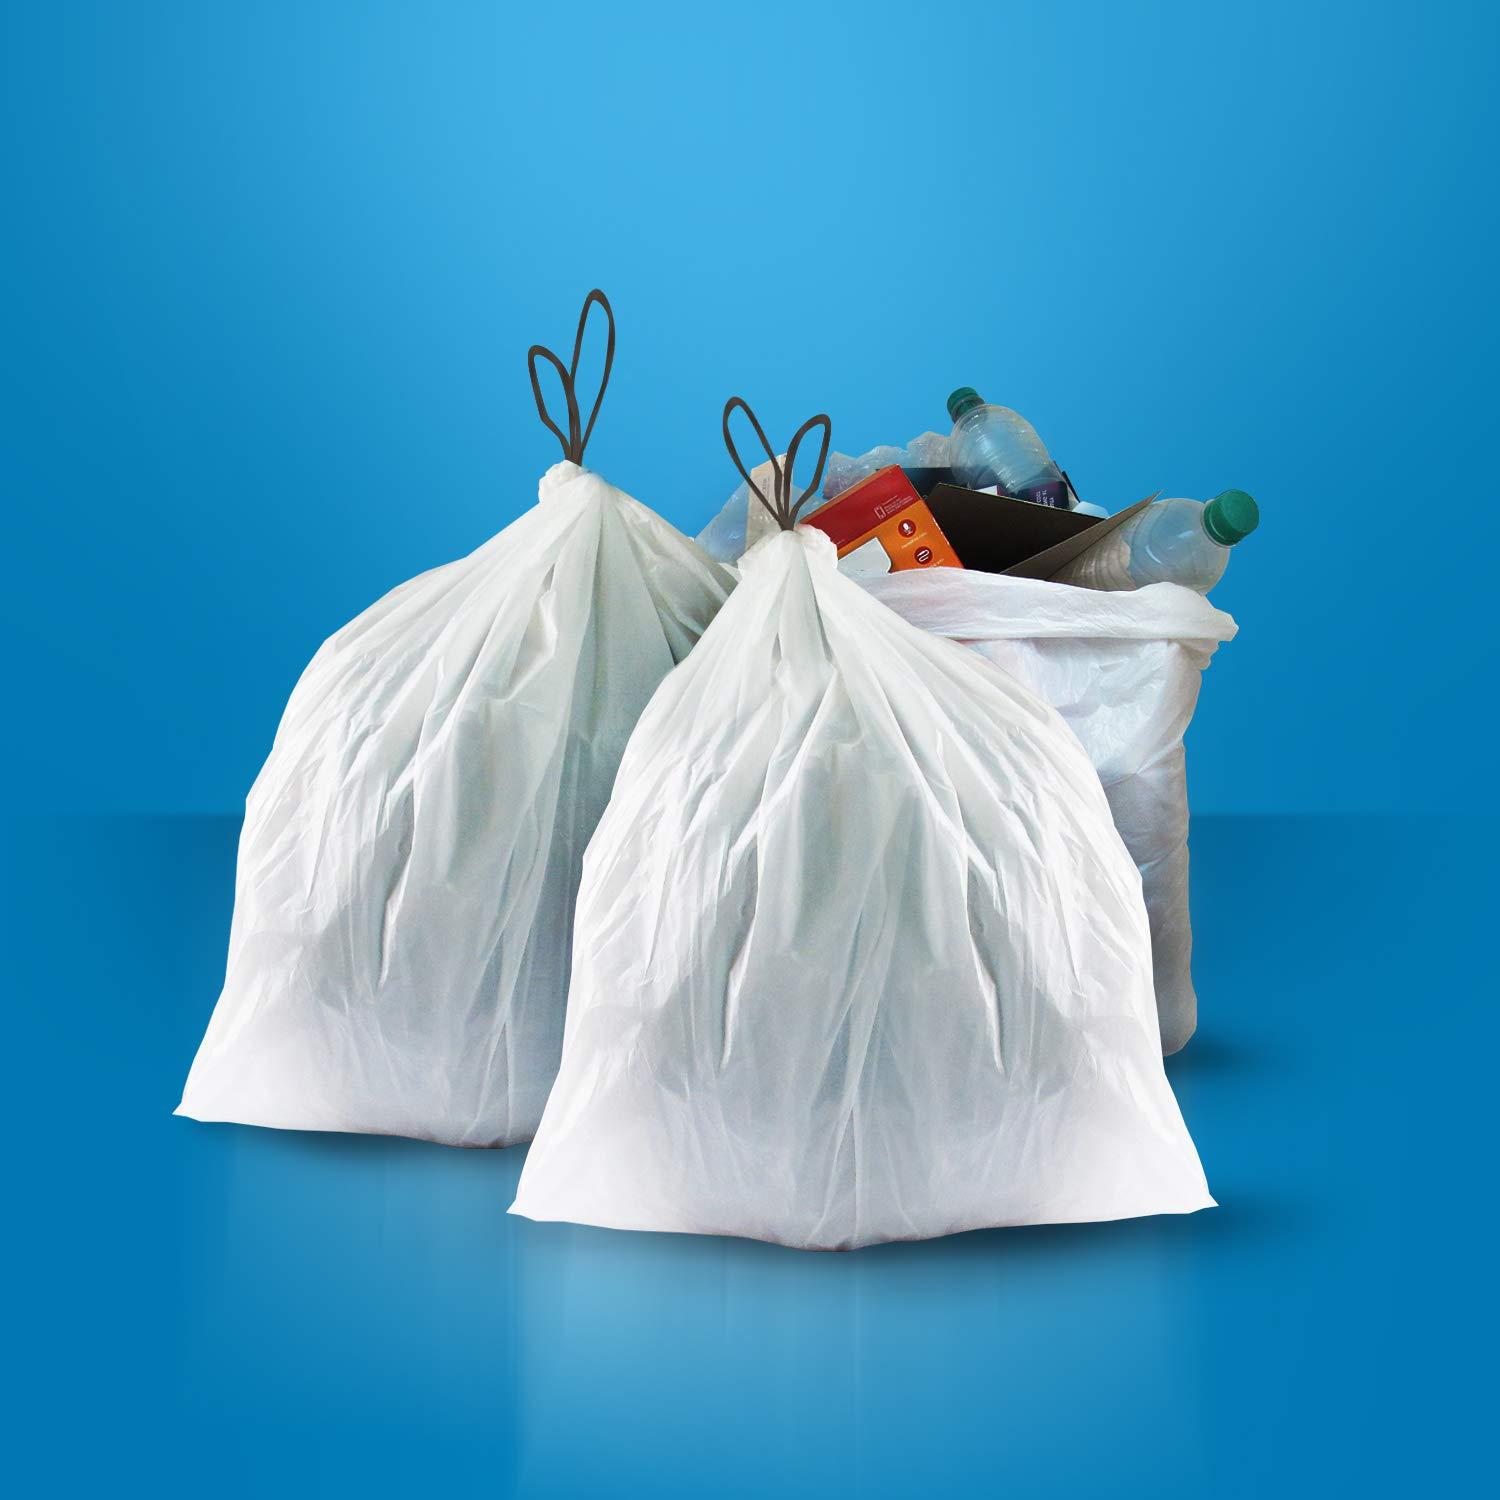 Commercial 18 Gallon Trash Compactor Bags /w Drawstrings - 2 MIL - 50  Count